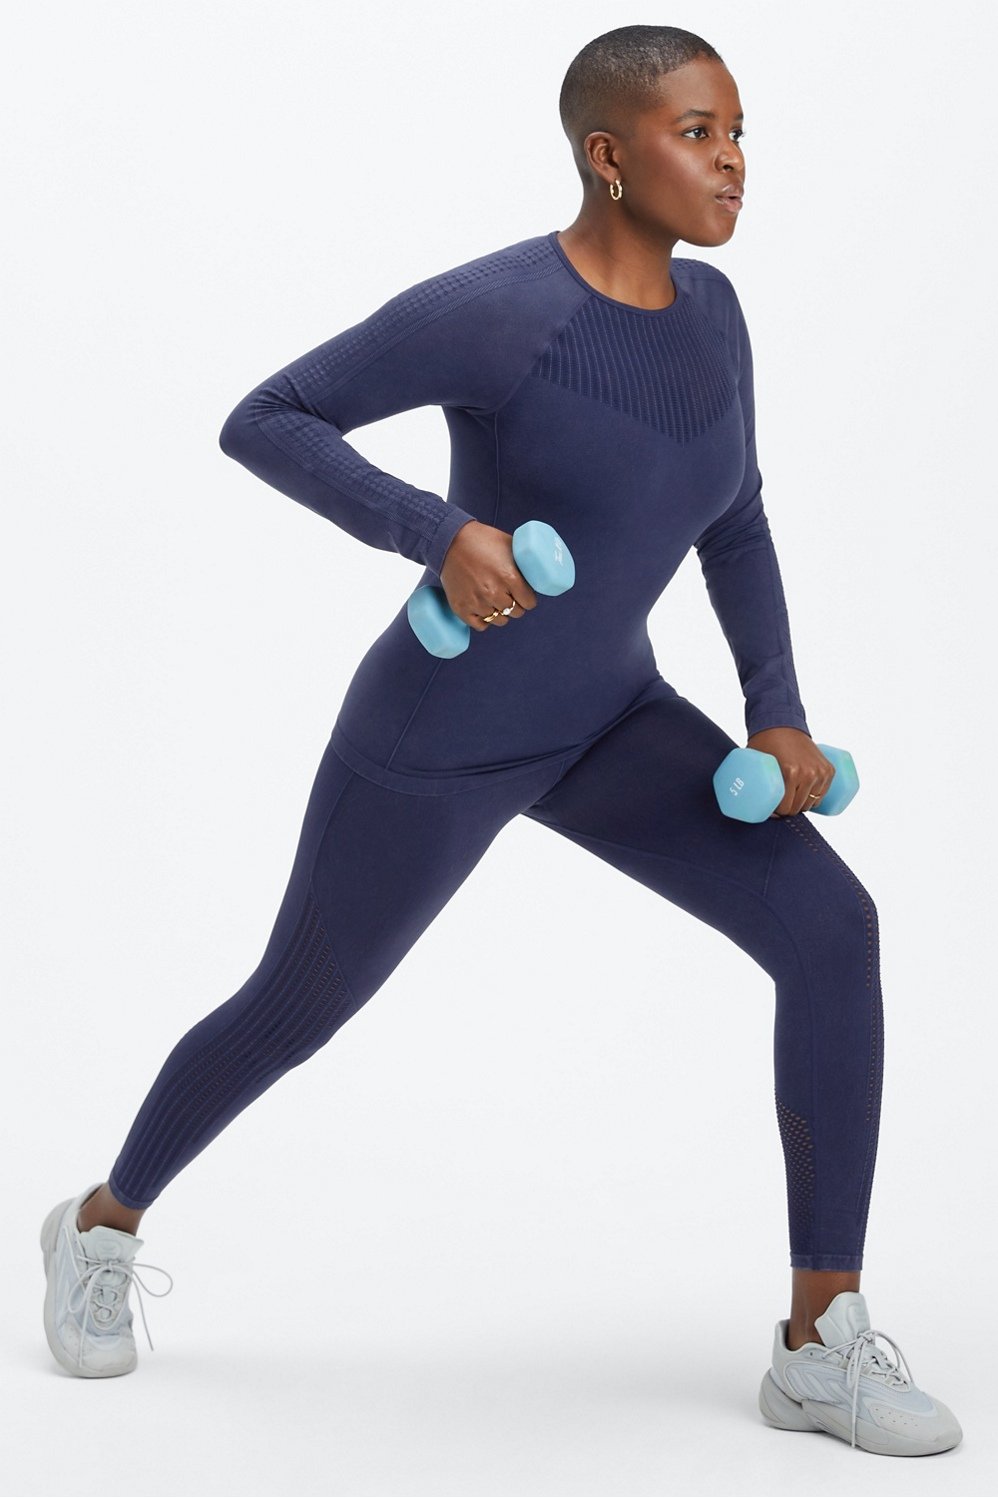 Fabletics Teal Blue Sync Seamless High Waisted Leggings Women's Size XS -  $21 - From May